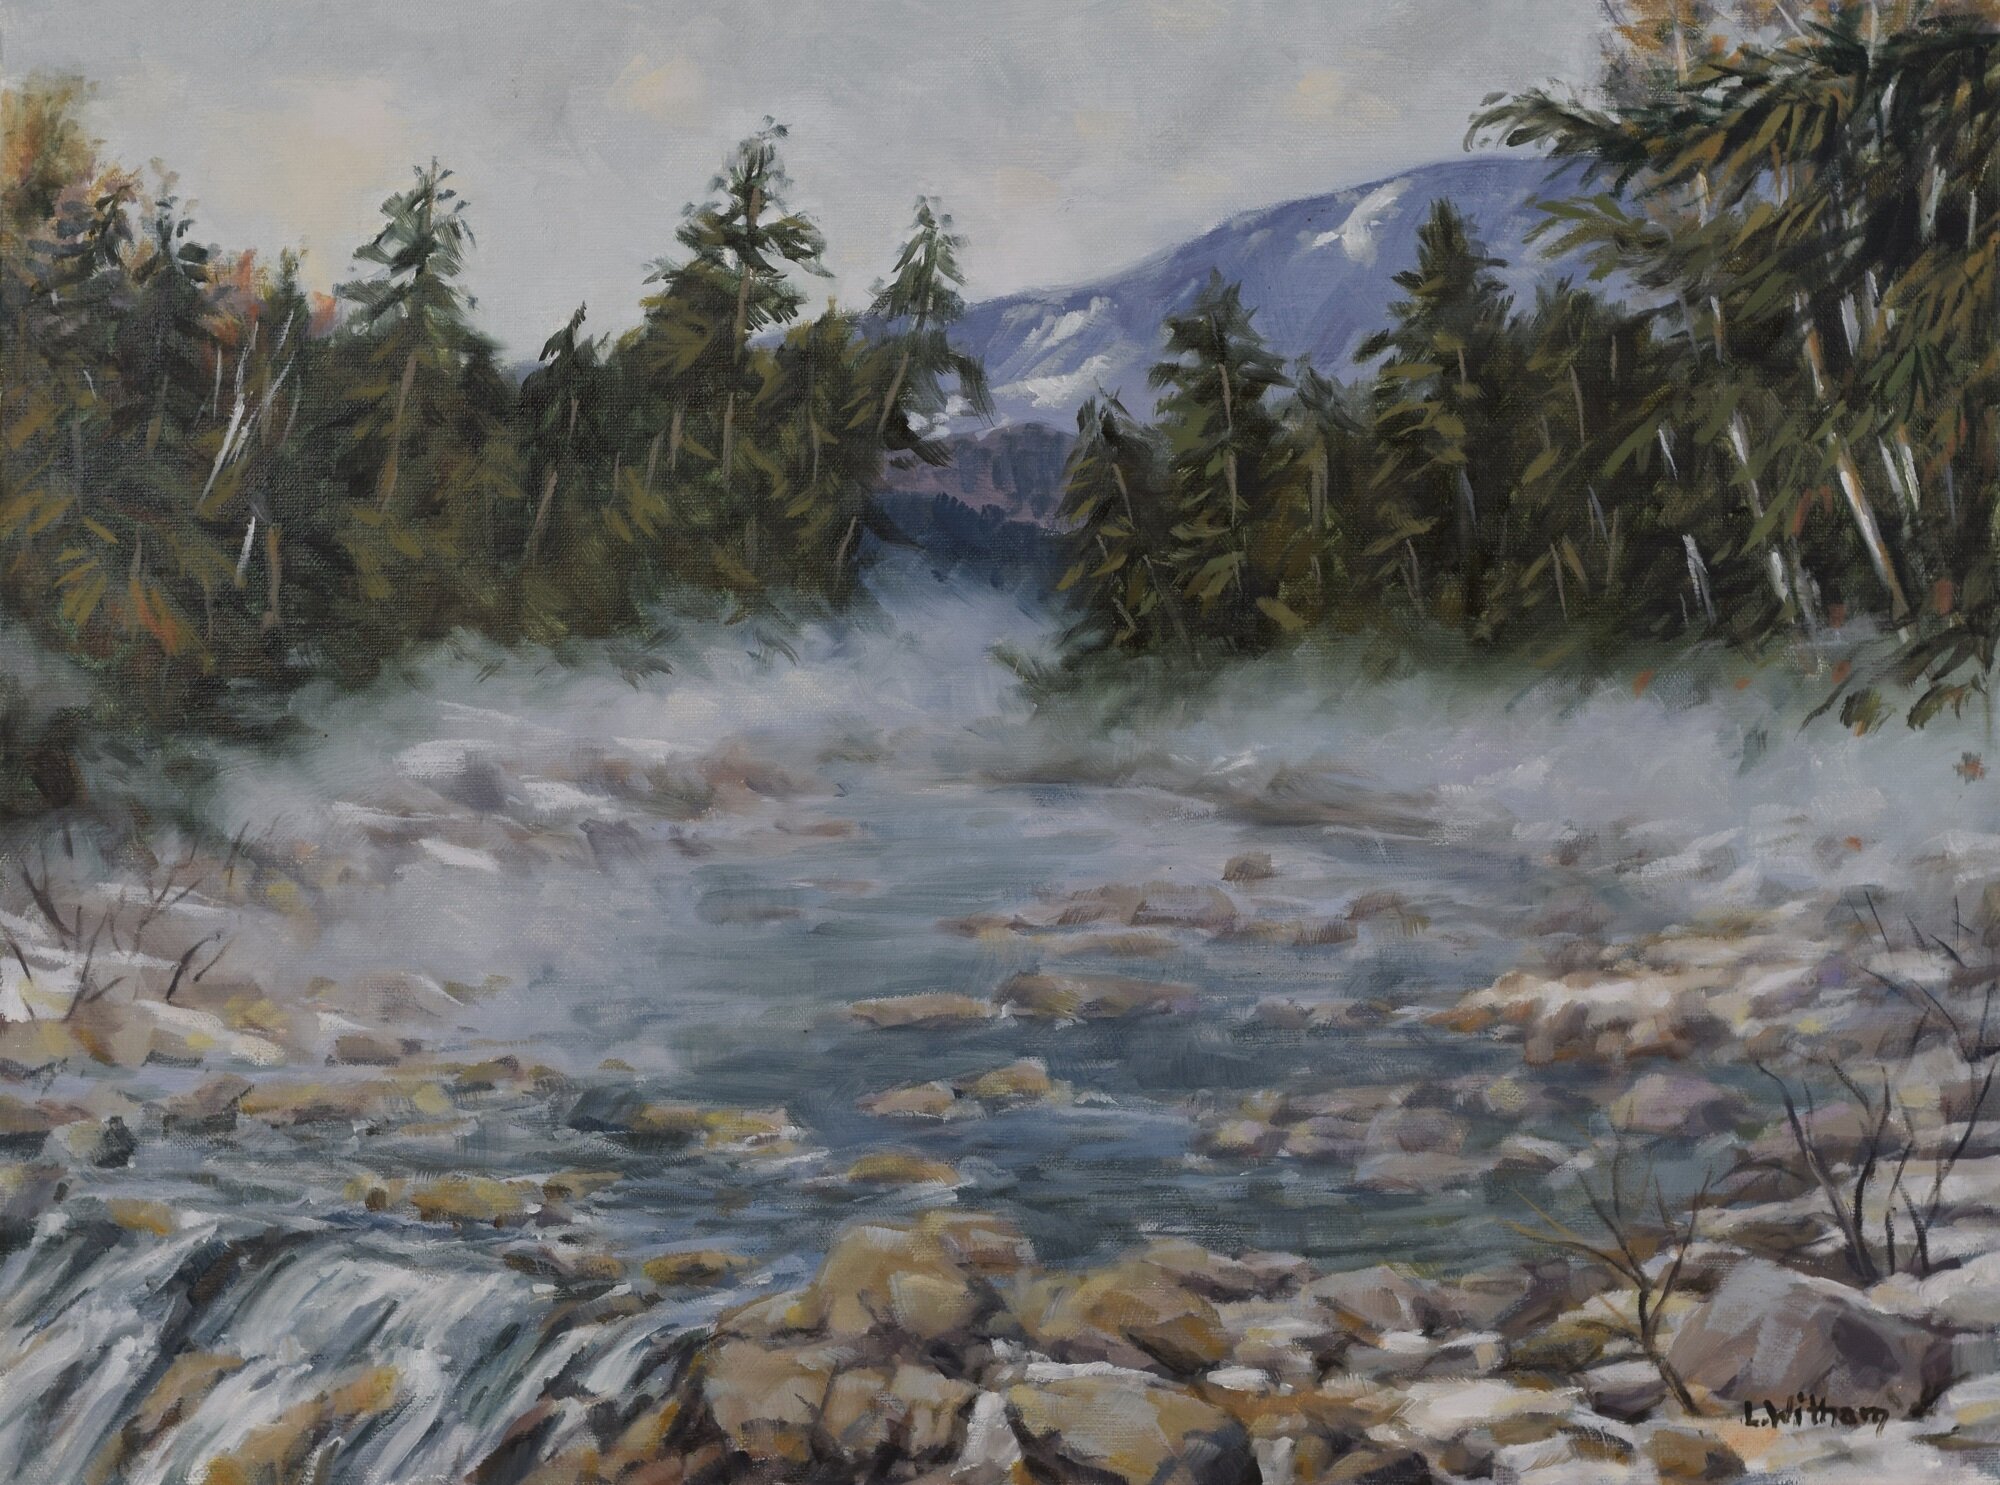 Misty River, New Hampshire, Oil on linen, 12x16